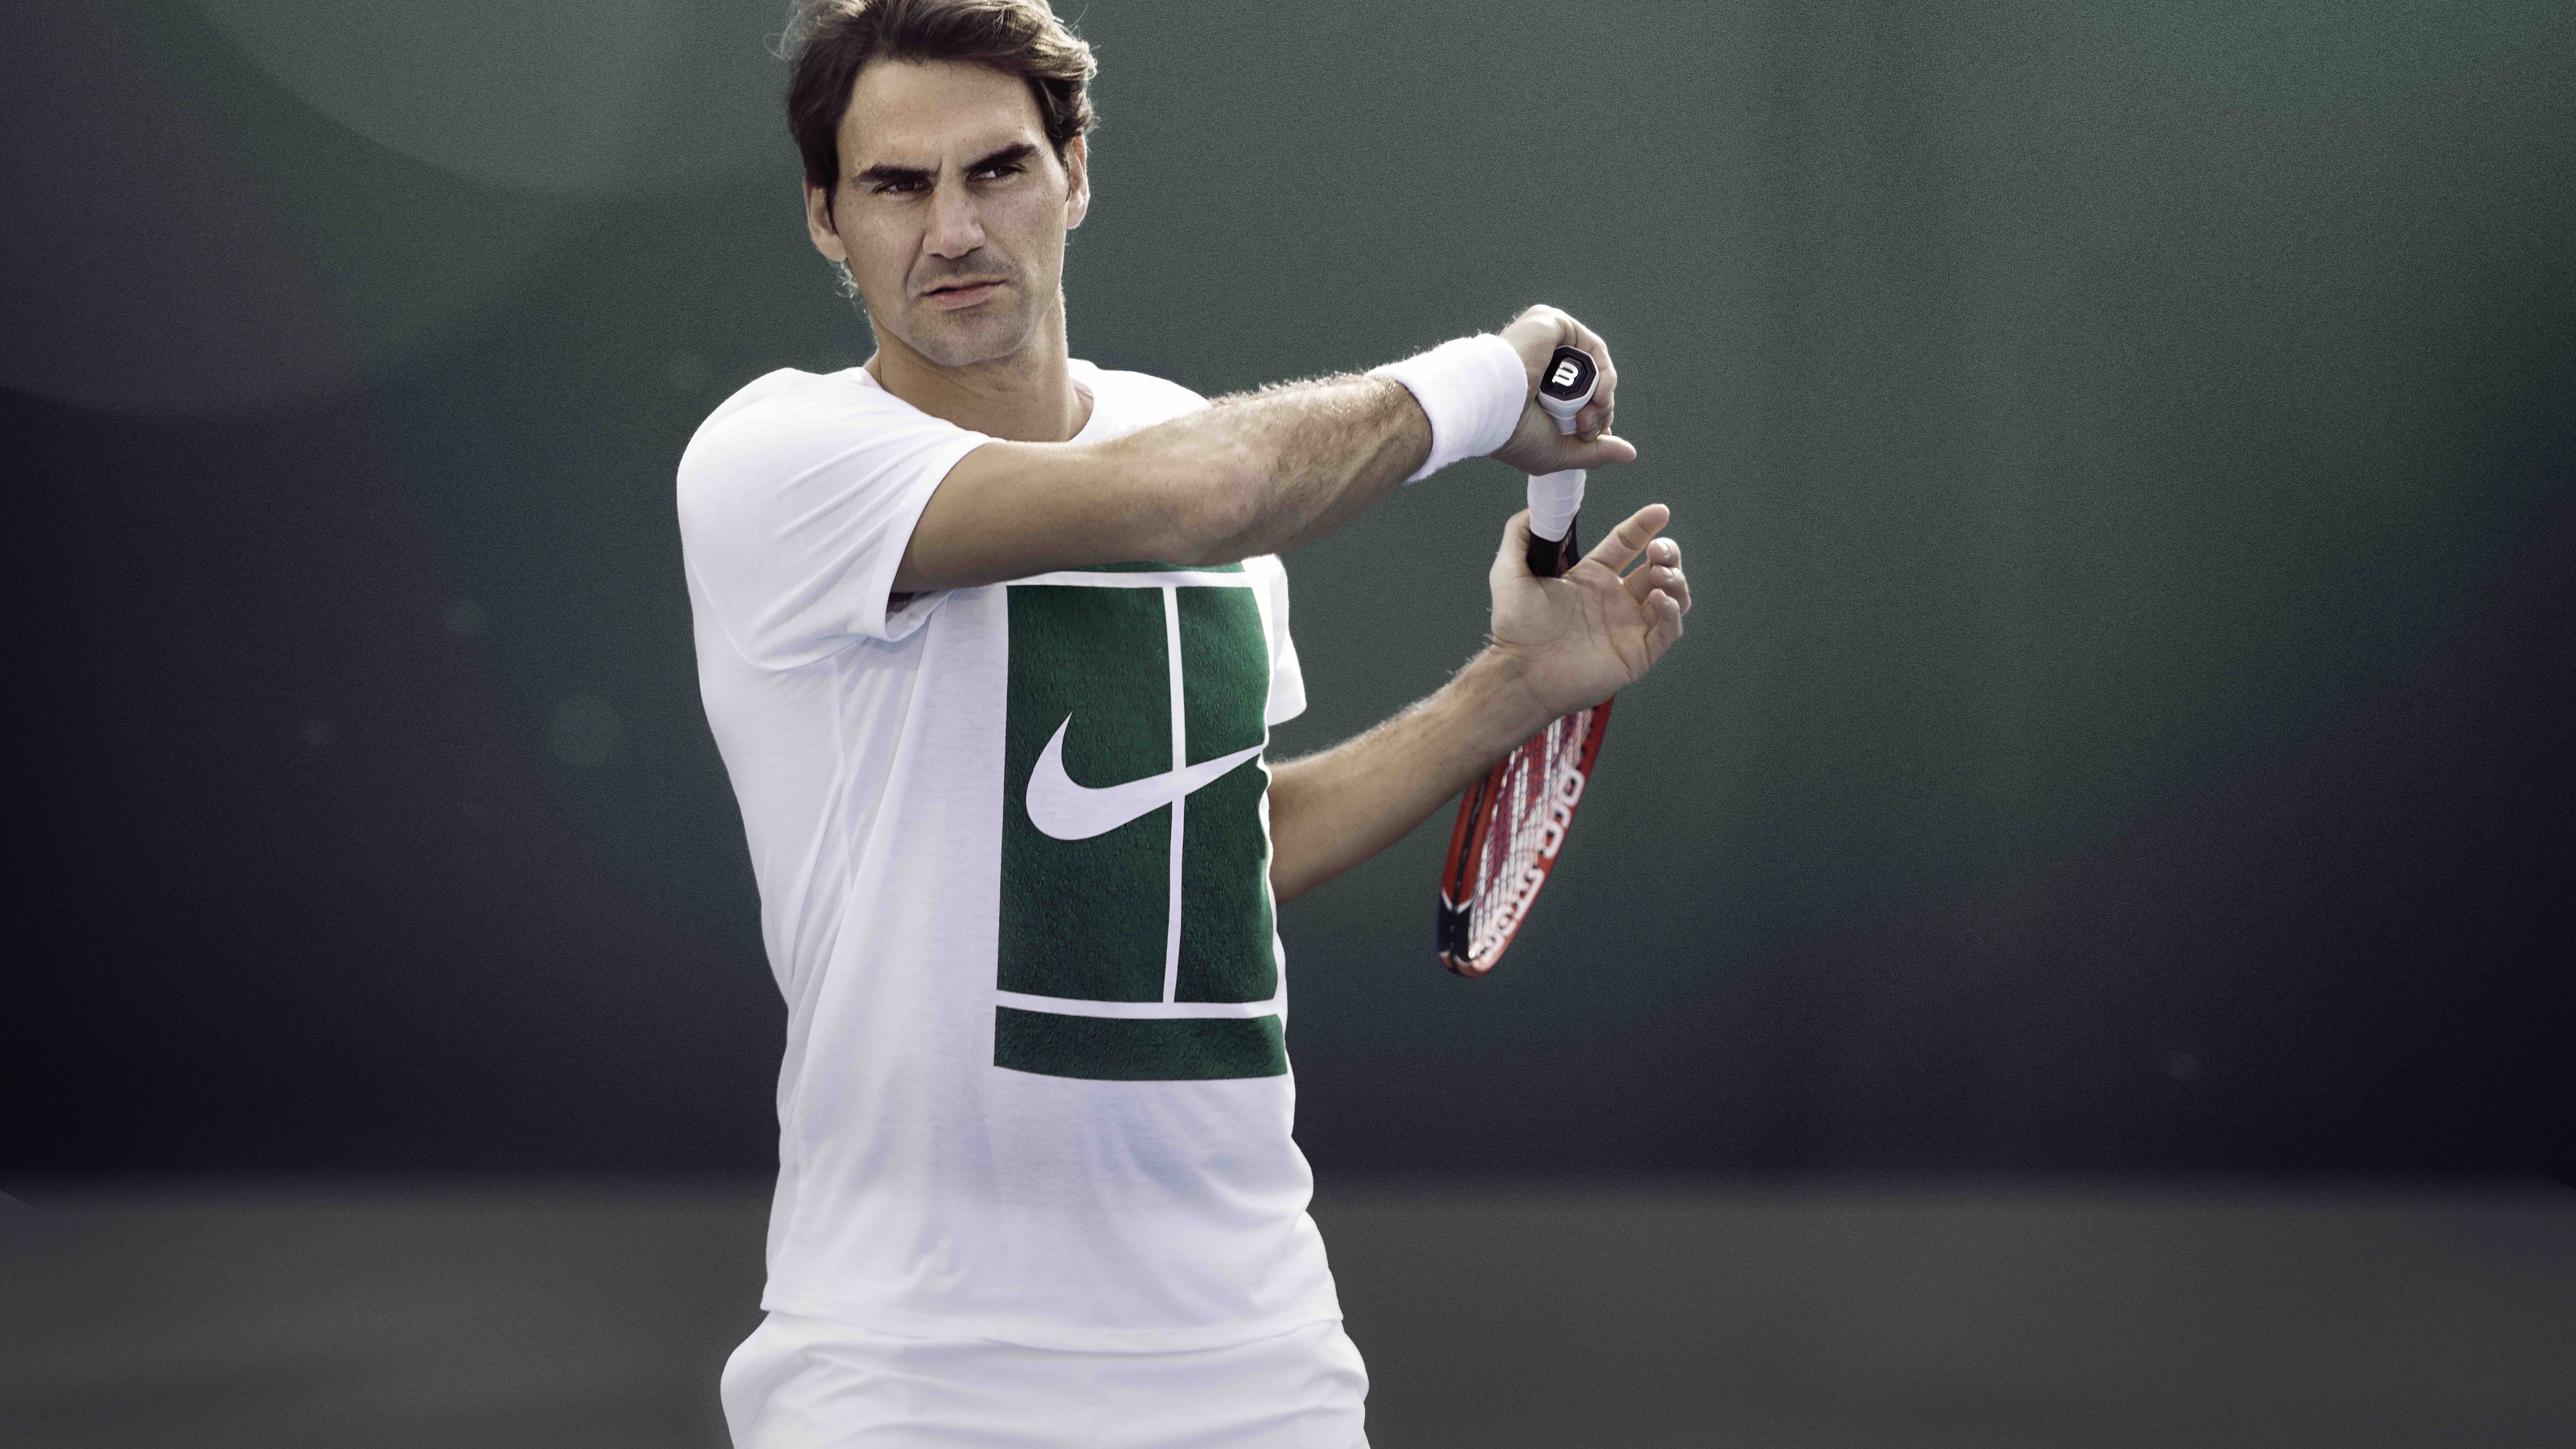 7680x4320 Roger Federer Tennis Player 8k HD 4k Wallpapers, Images,  Backgrounds, Photos and Pictures